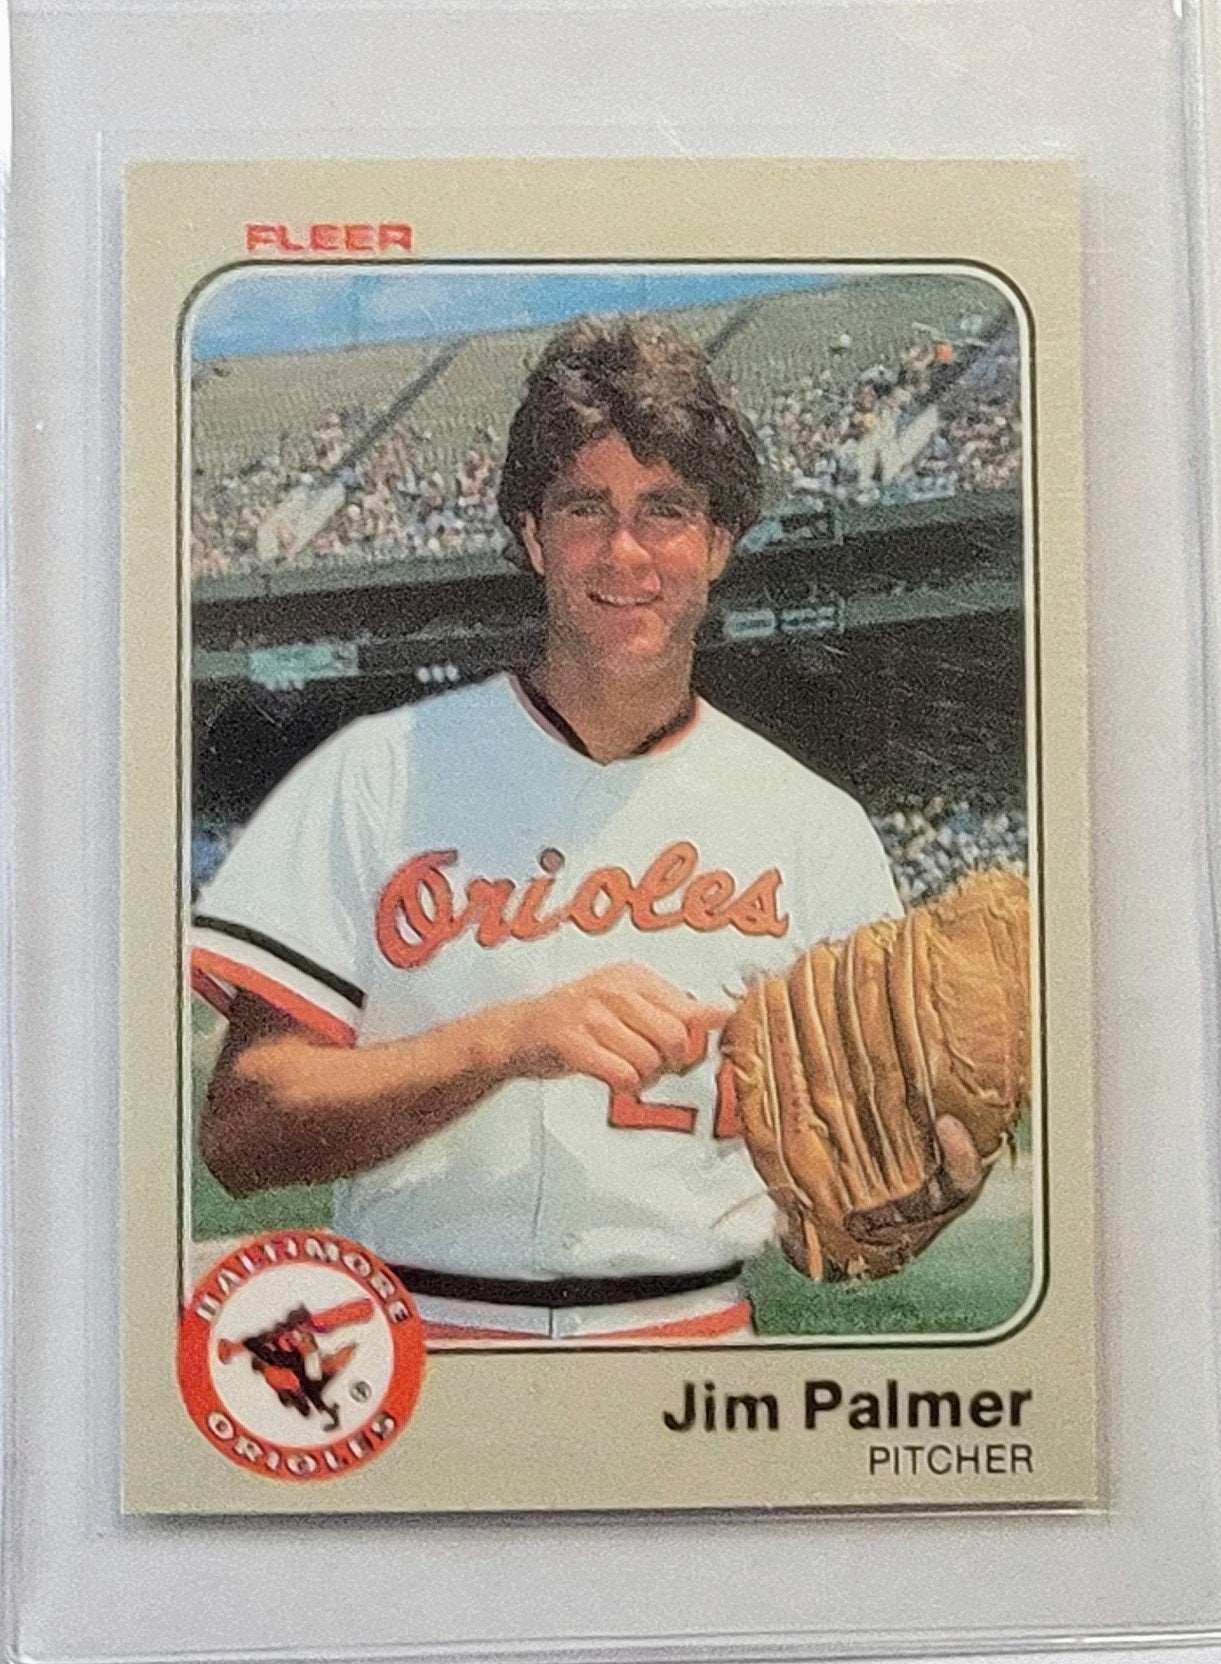 1983 Fleer Jim Palmer Baseball Card Great Centering AVM1 simple Xclusive Collectibles   